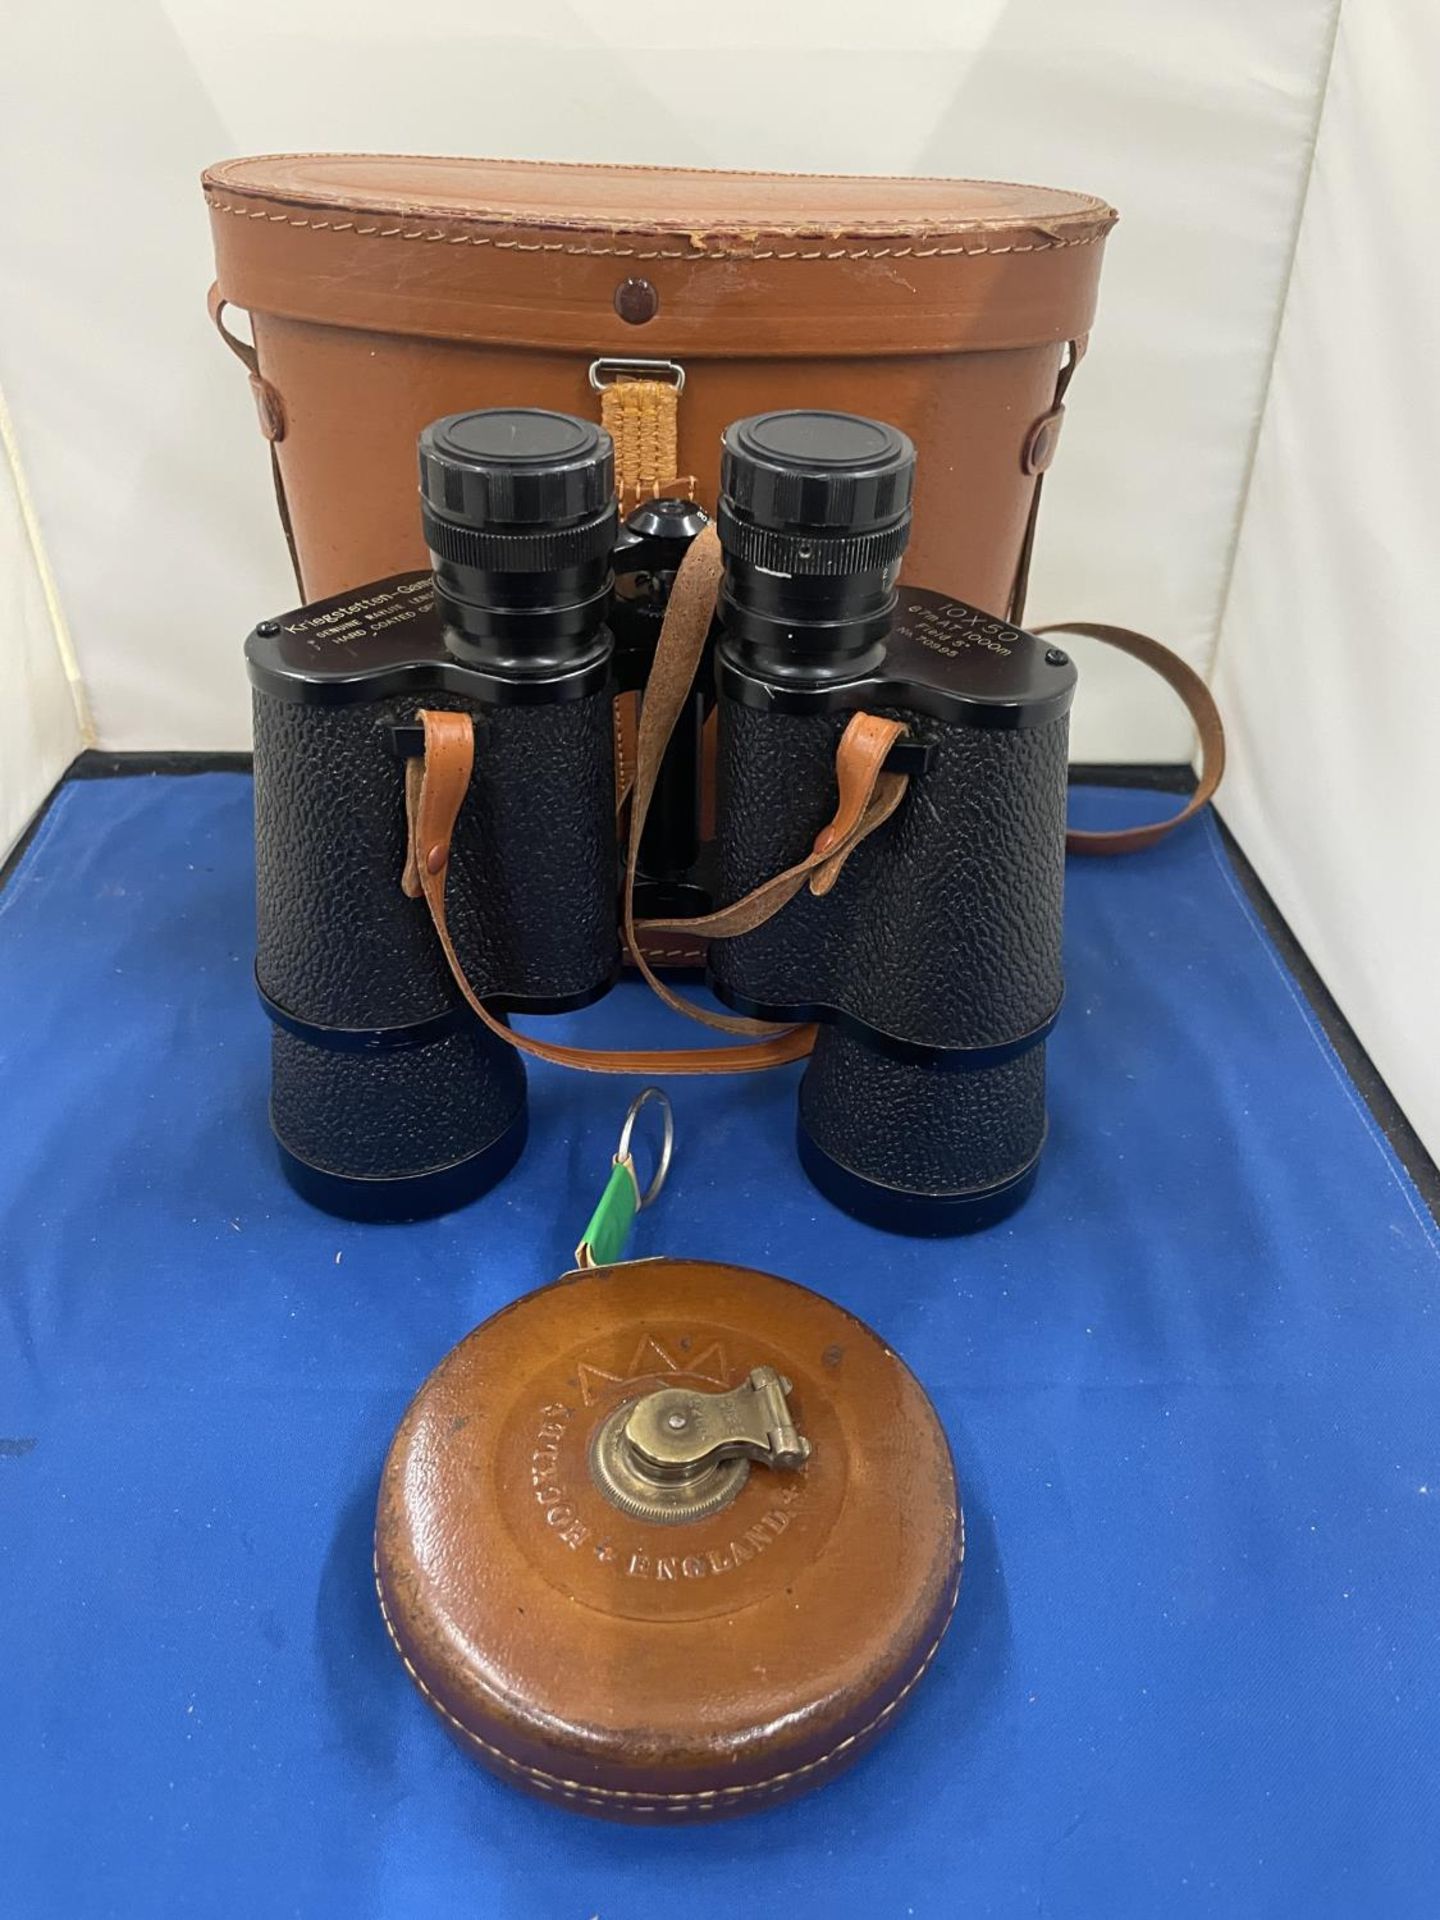 A PAIR OF KRIEGSTETTEN - GAMA BINOCULARS IN A LEATHER CASE WITH A VINTAGE LEATHER TAPE MEASURE